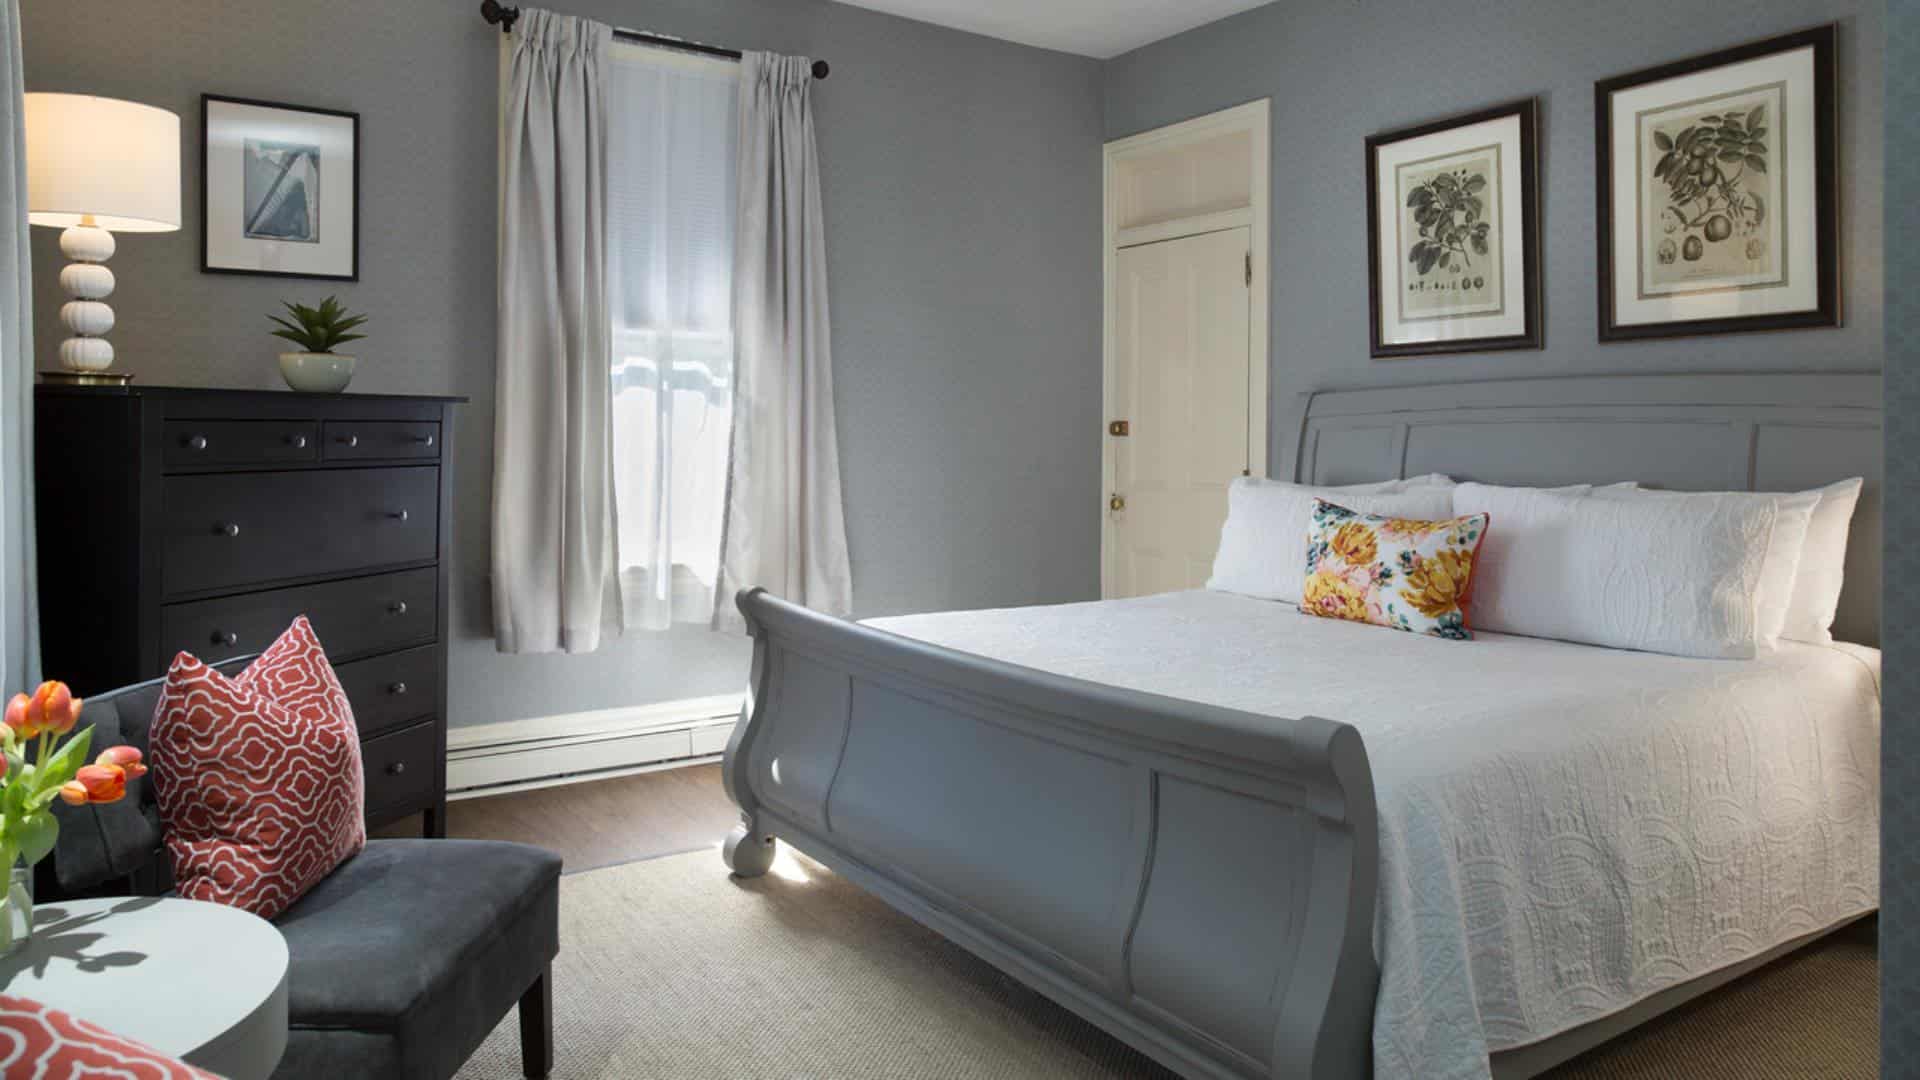 Large bedroom with gray wooden sleigh bed, white bedding, gray upholstered chair, and dark wooden dresser